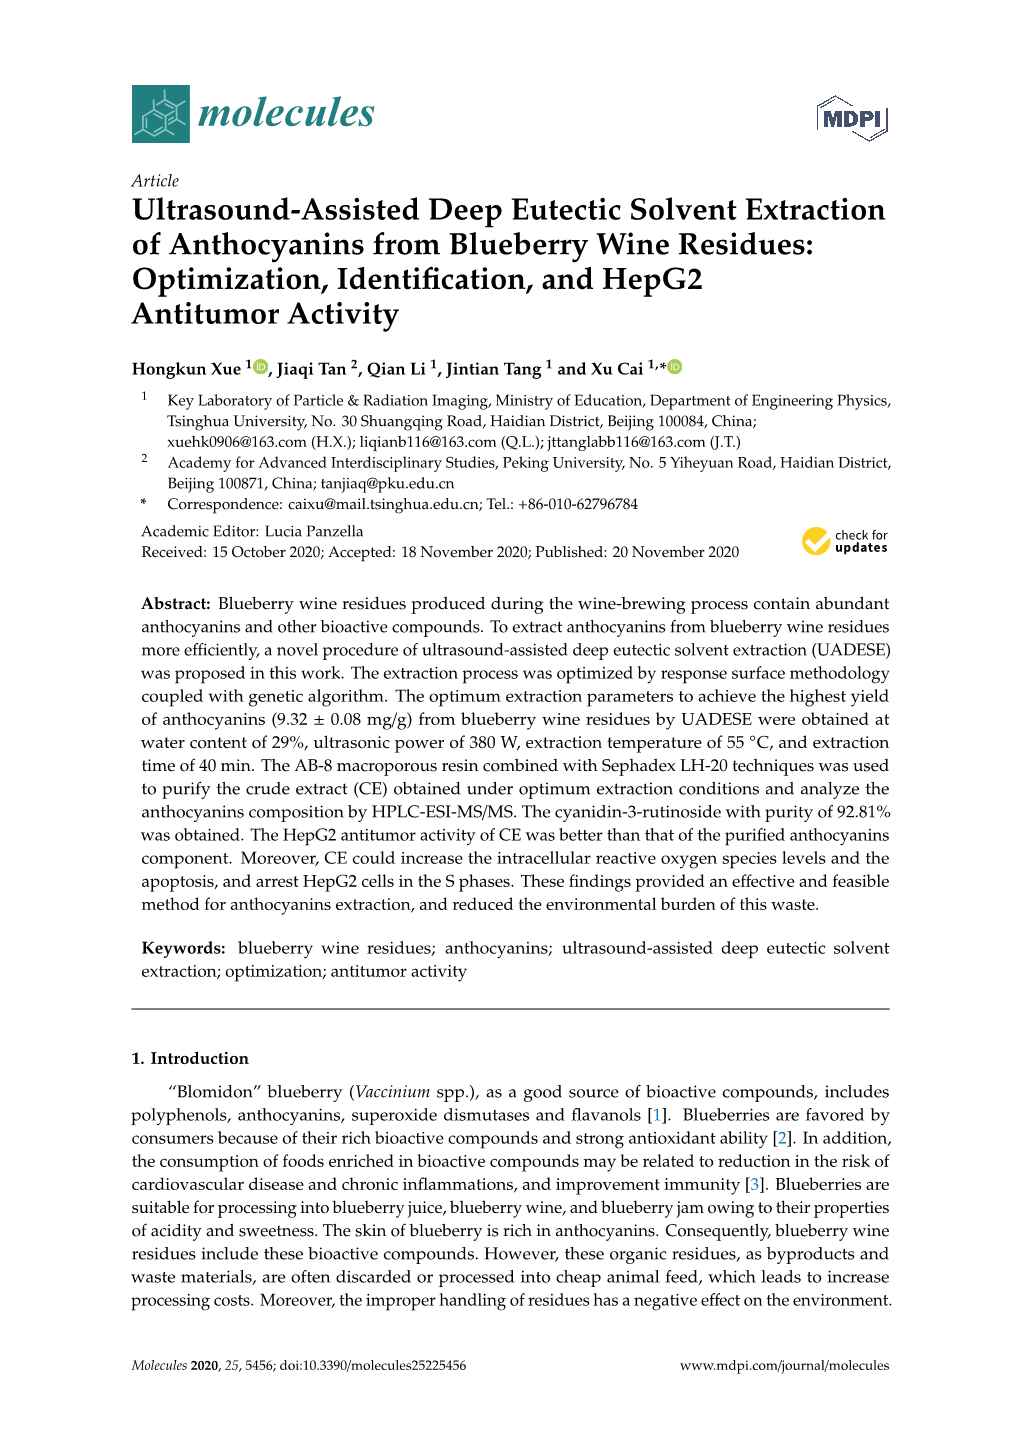 Ultrasound-Assisted Deep Eutectic Solvent Extraction of Anthocyanins from Blueberry Wine Residues: Optimization, Identiﬁcation, and Hepg2 Antitumor Activity